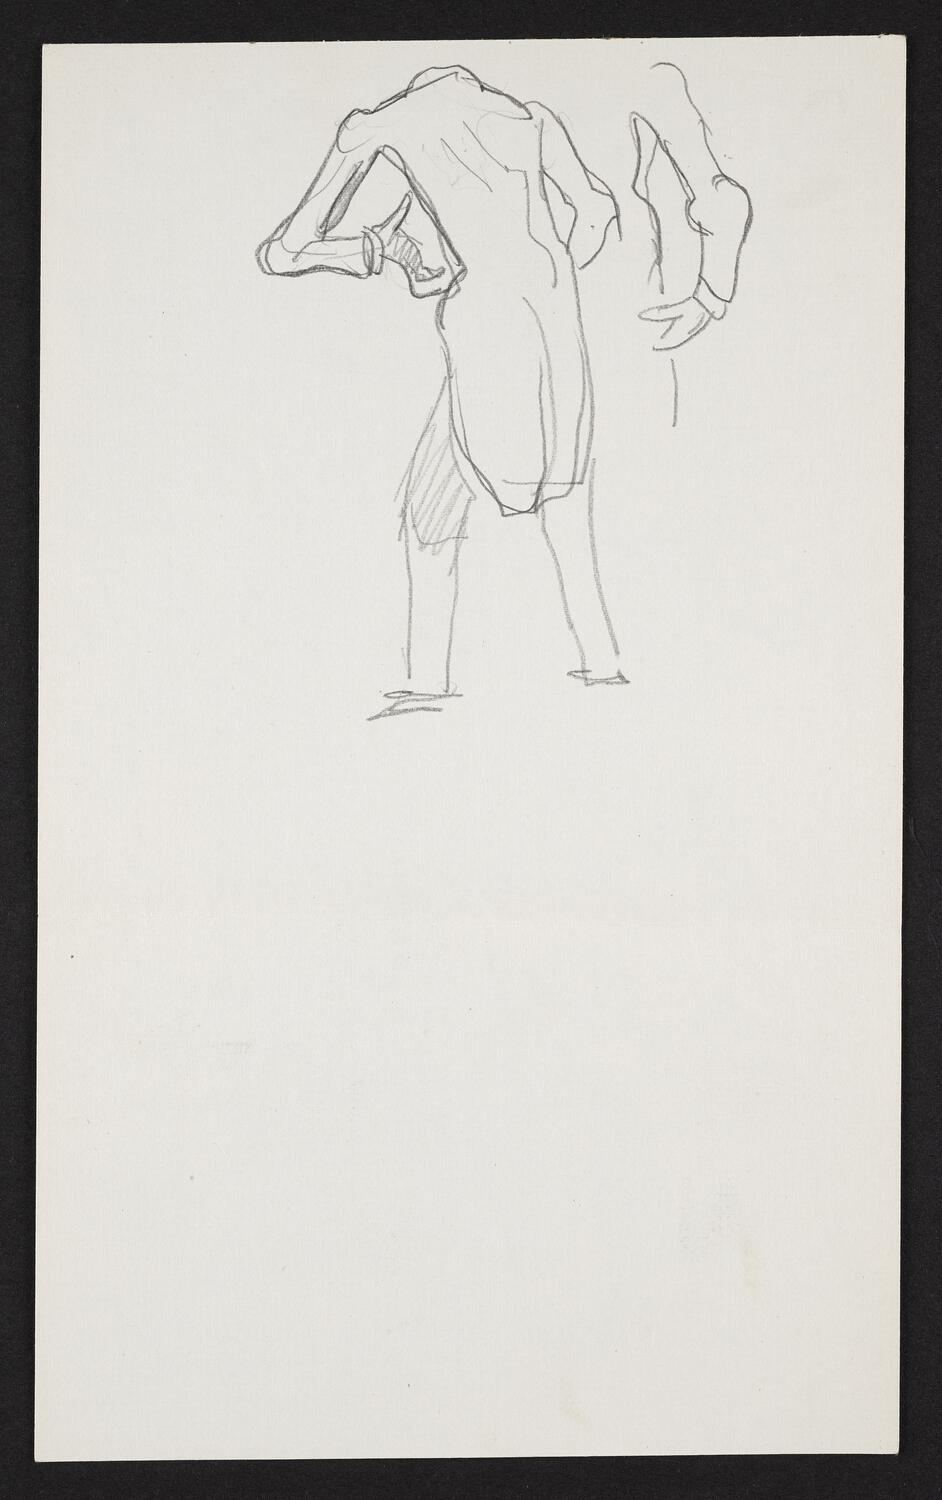 Sketch of standing figure with back to the viewer